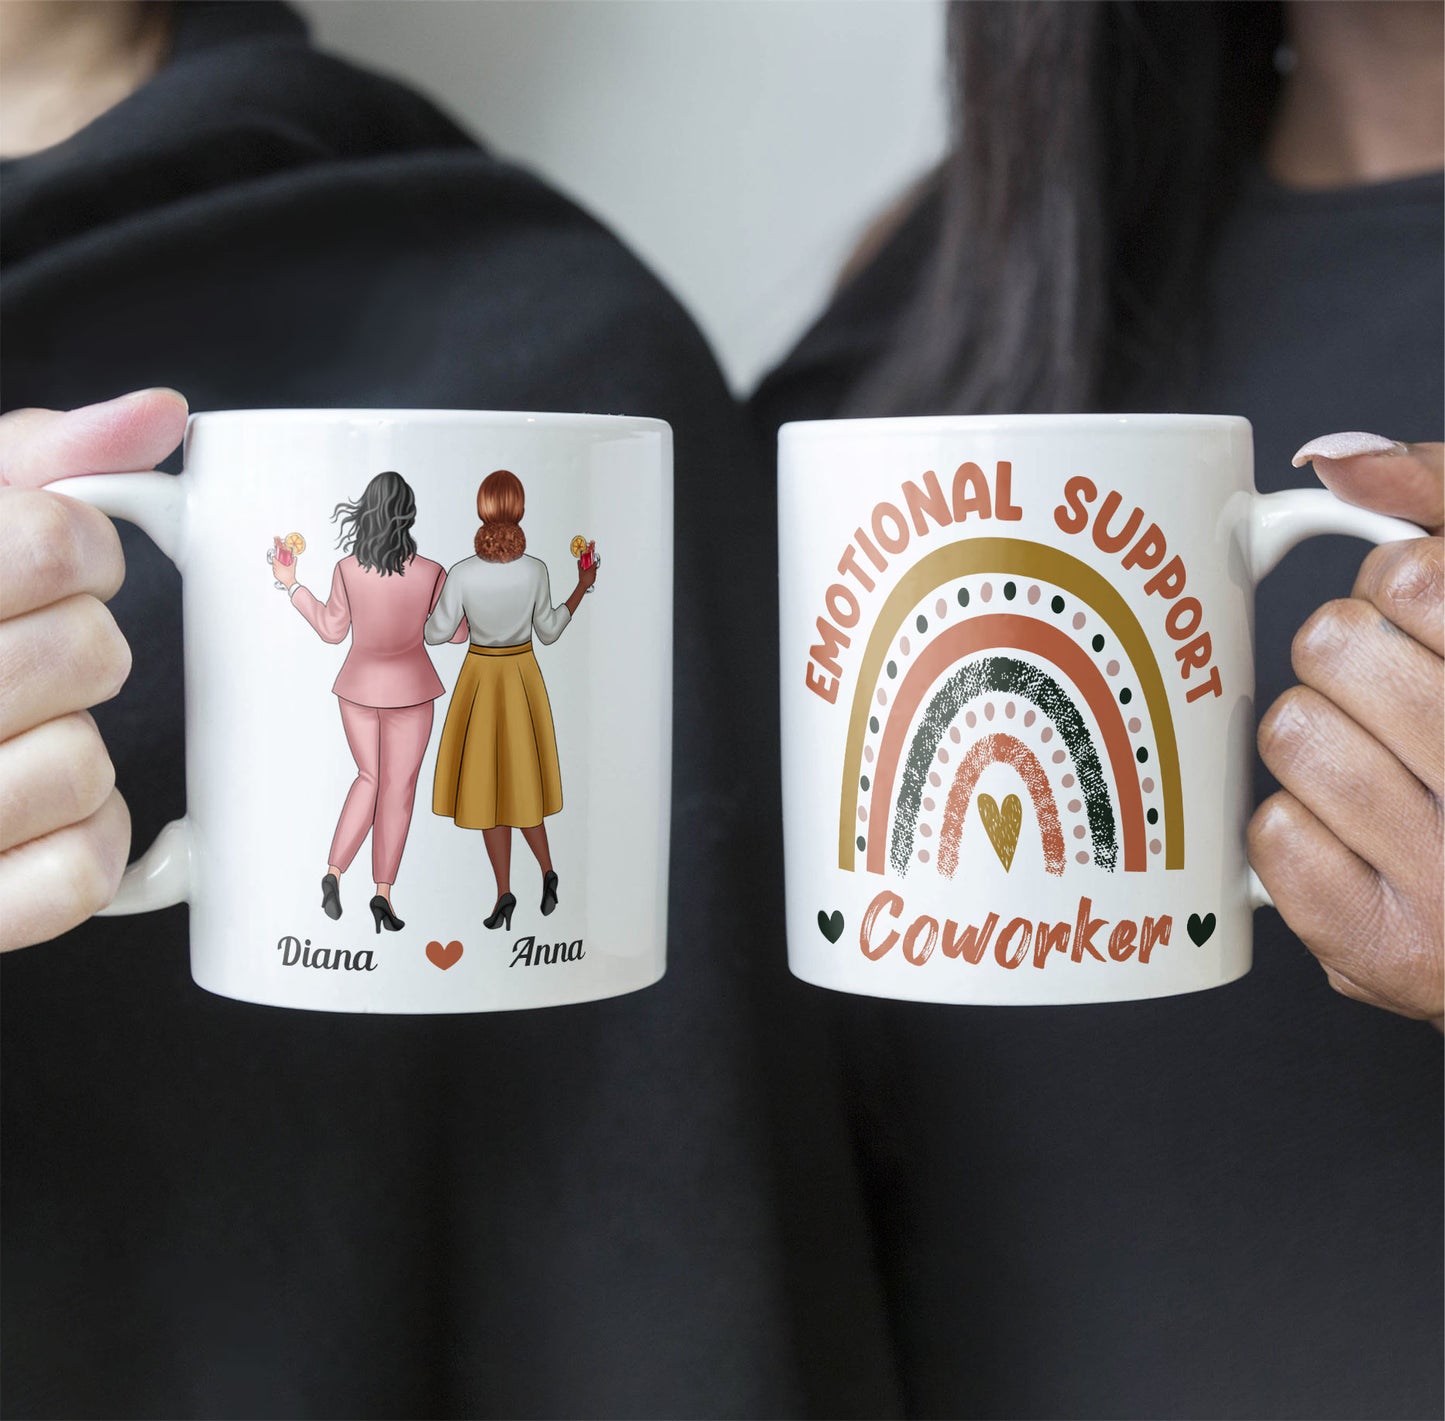 Emotional Support Coworker - Personalized Mug